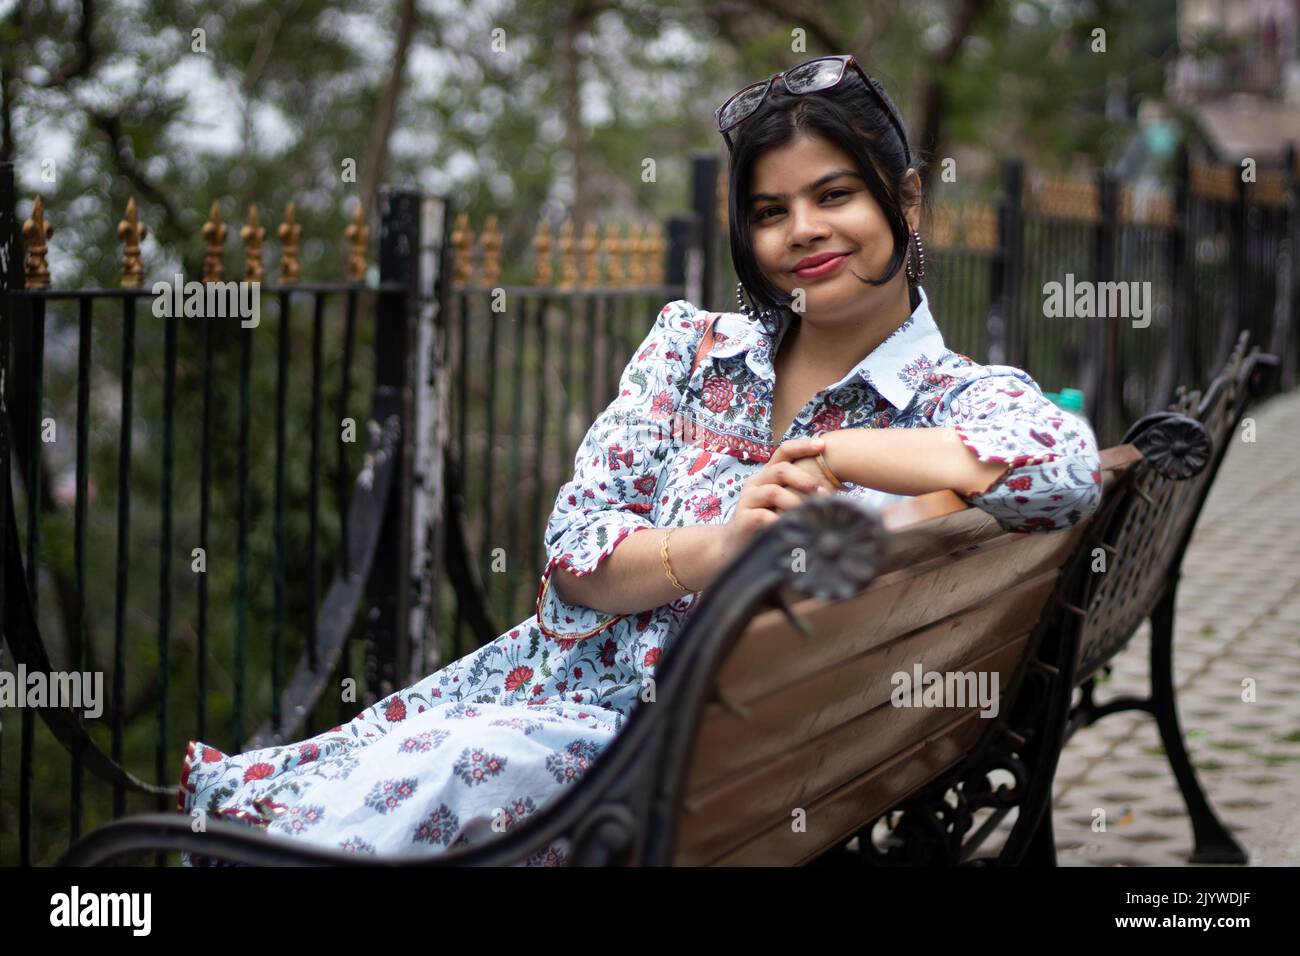 A pretty Indian woman with sunglasses on head smiling and looking at camera while sitting on a park bench Stock Photo